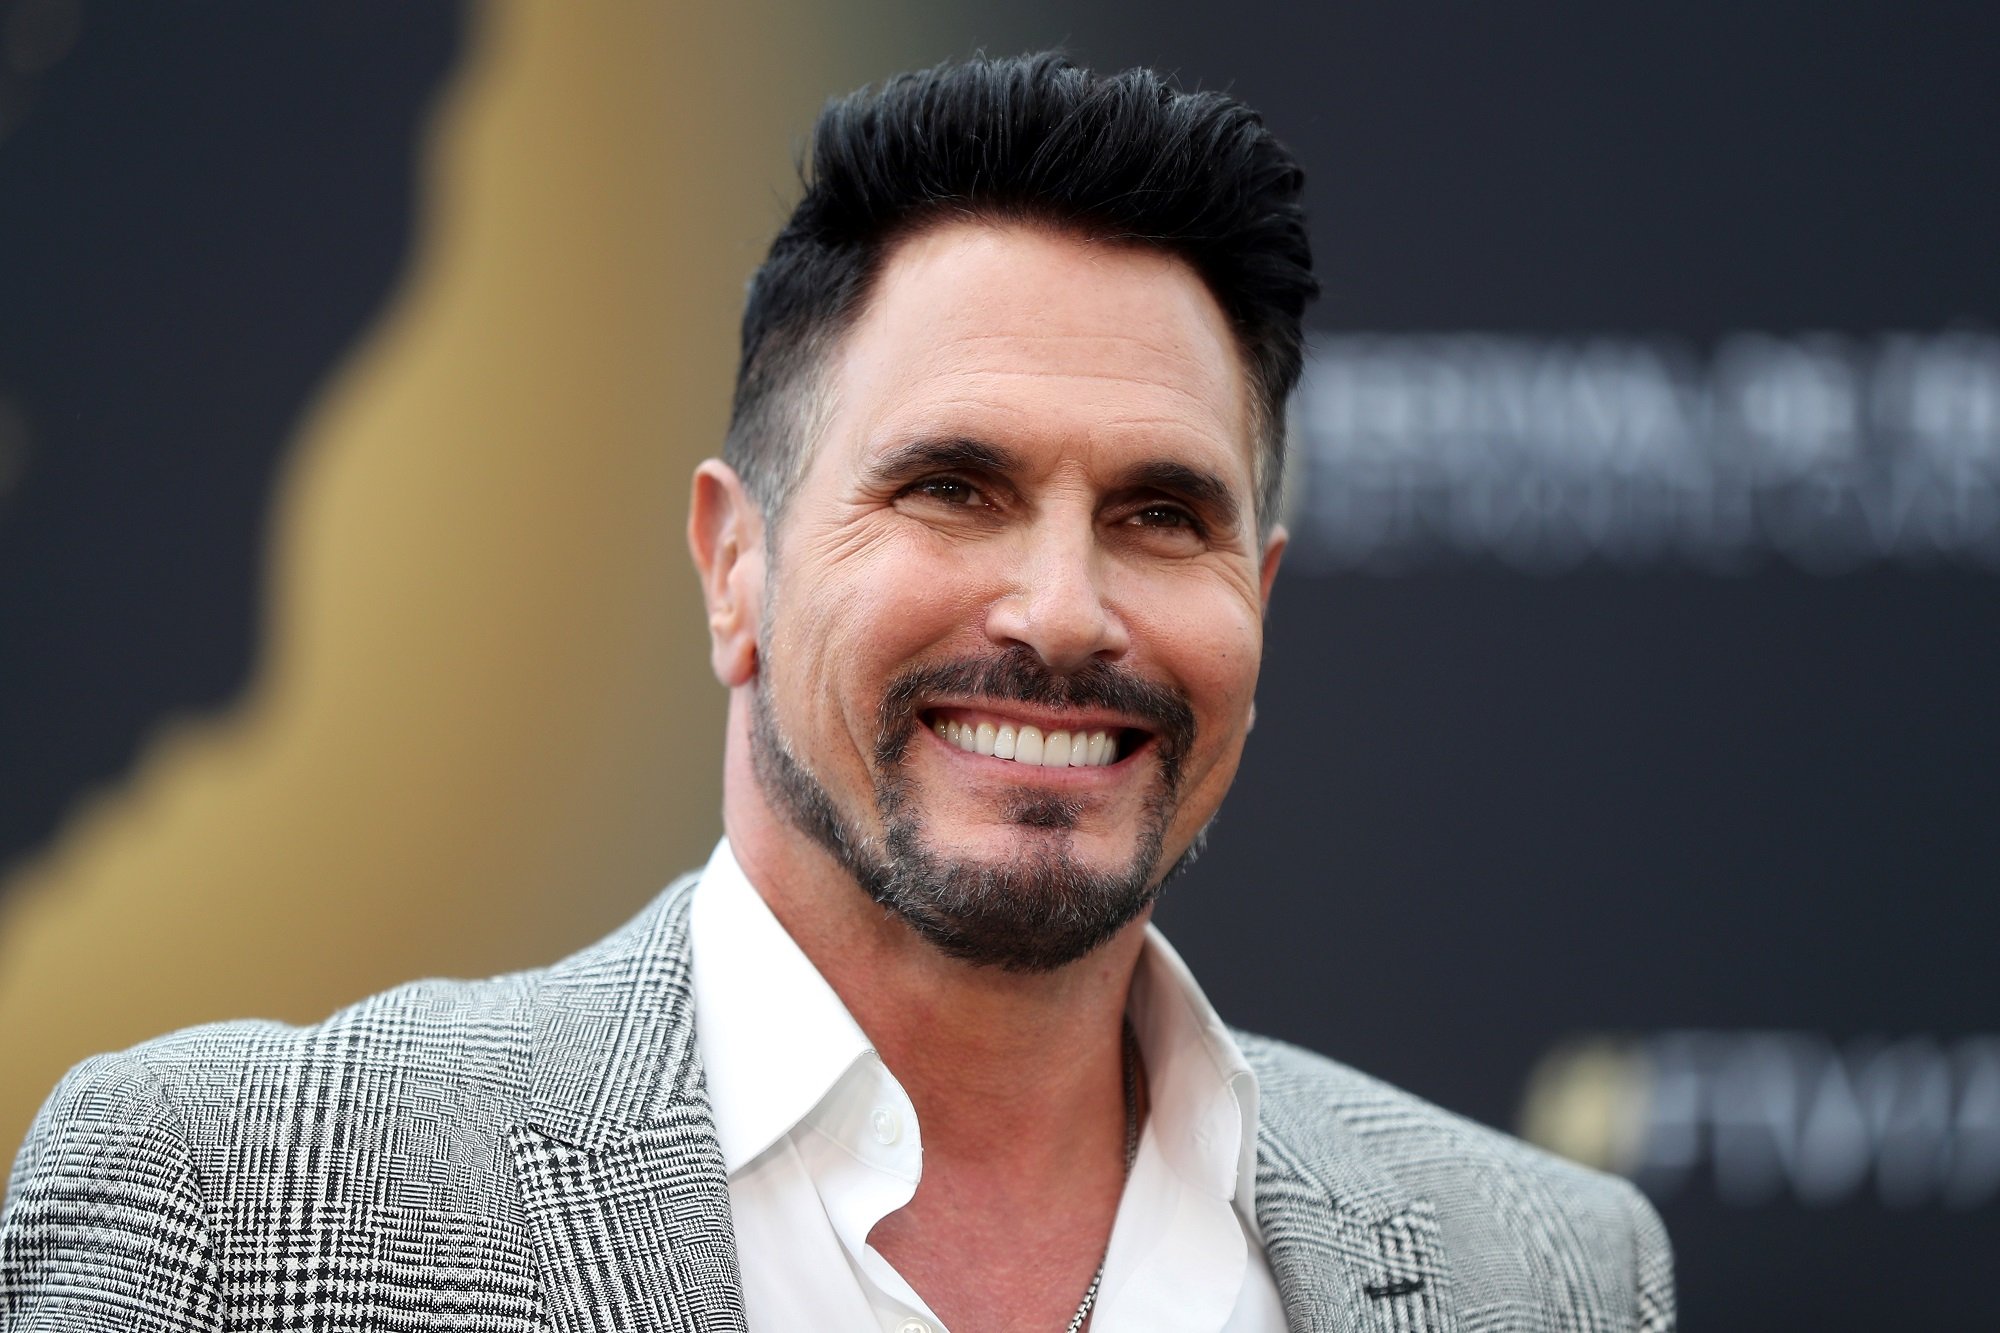 The Bold and the Beautiful star Don Diamont is pictured here in a white shirt